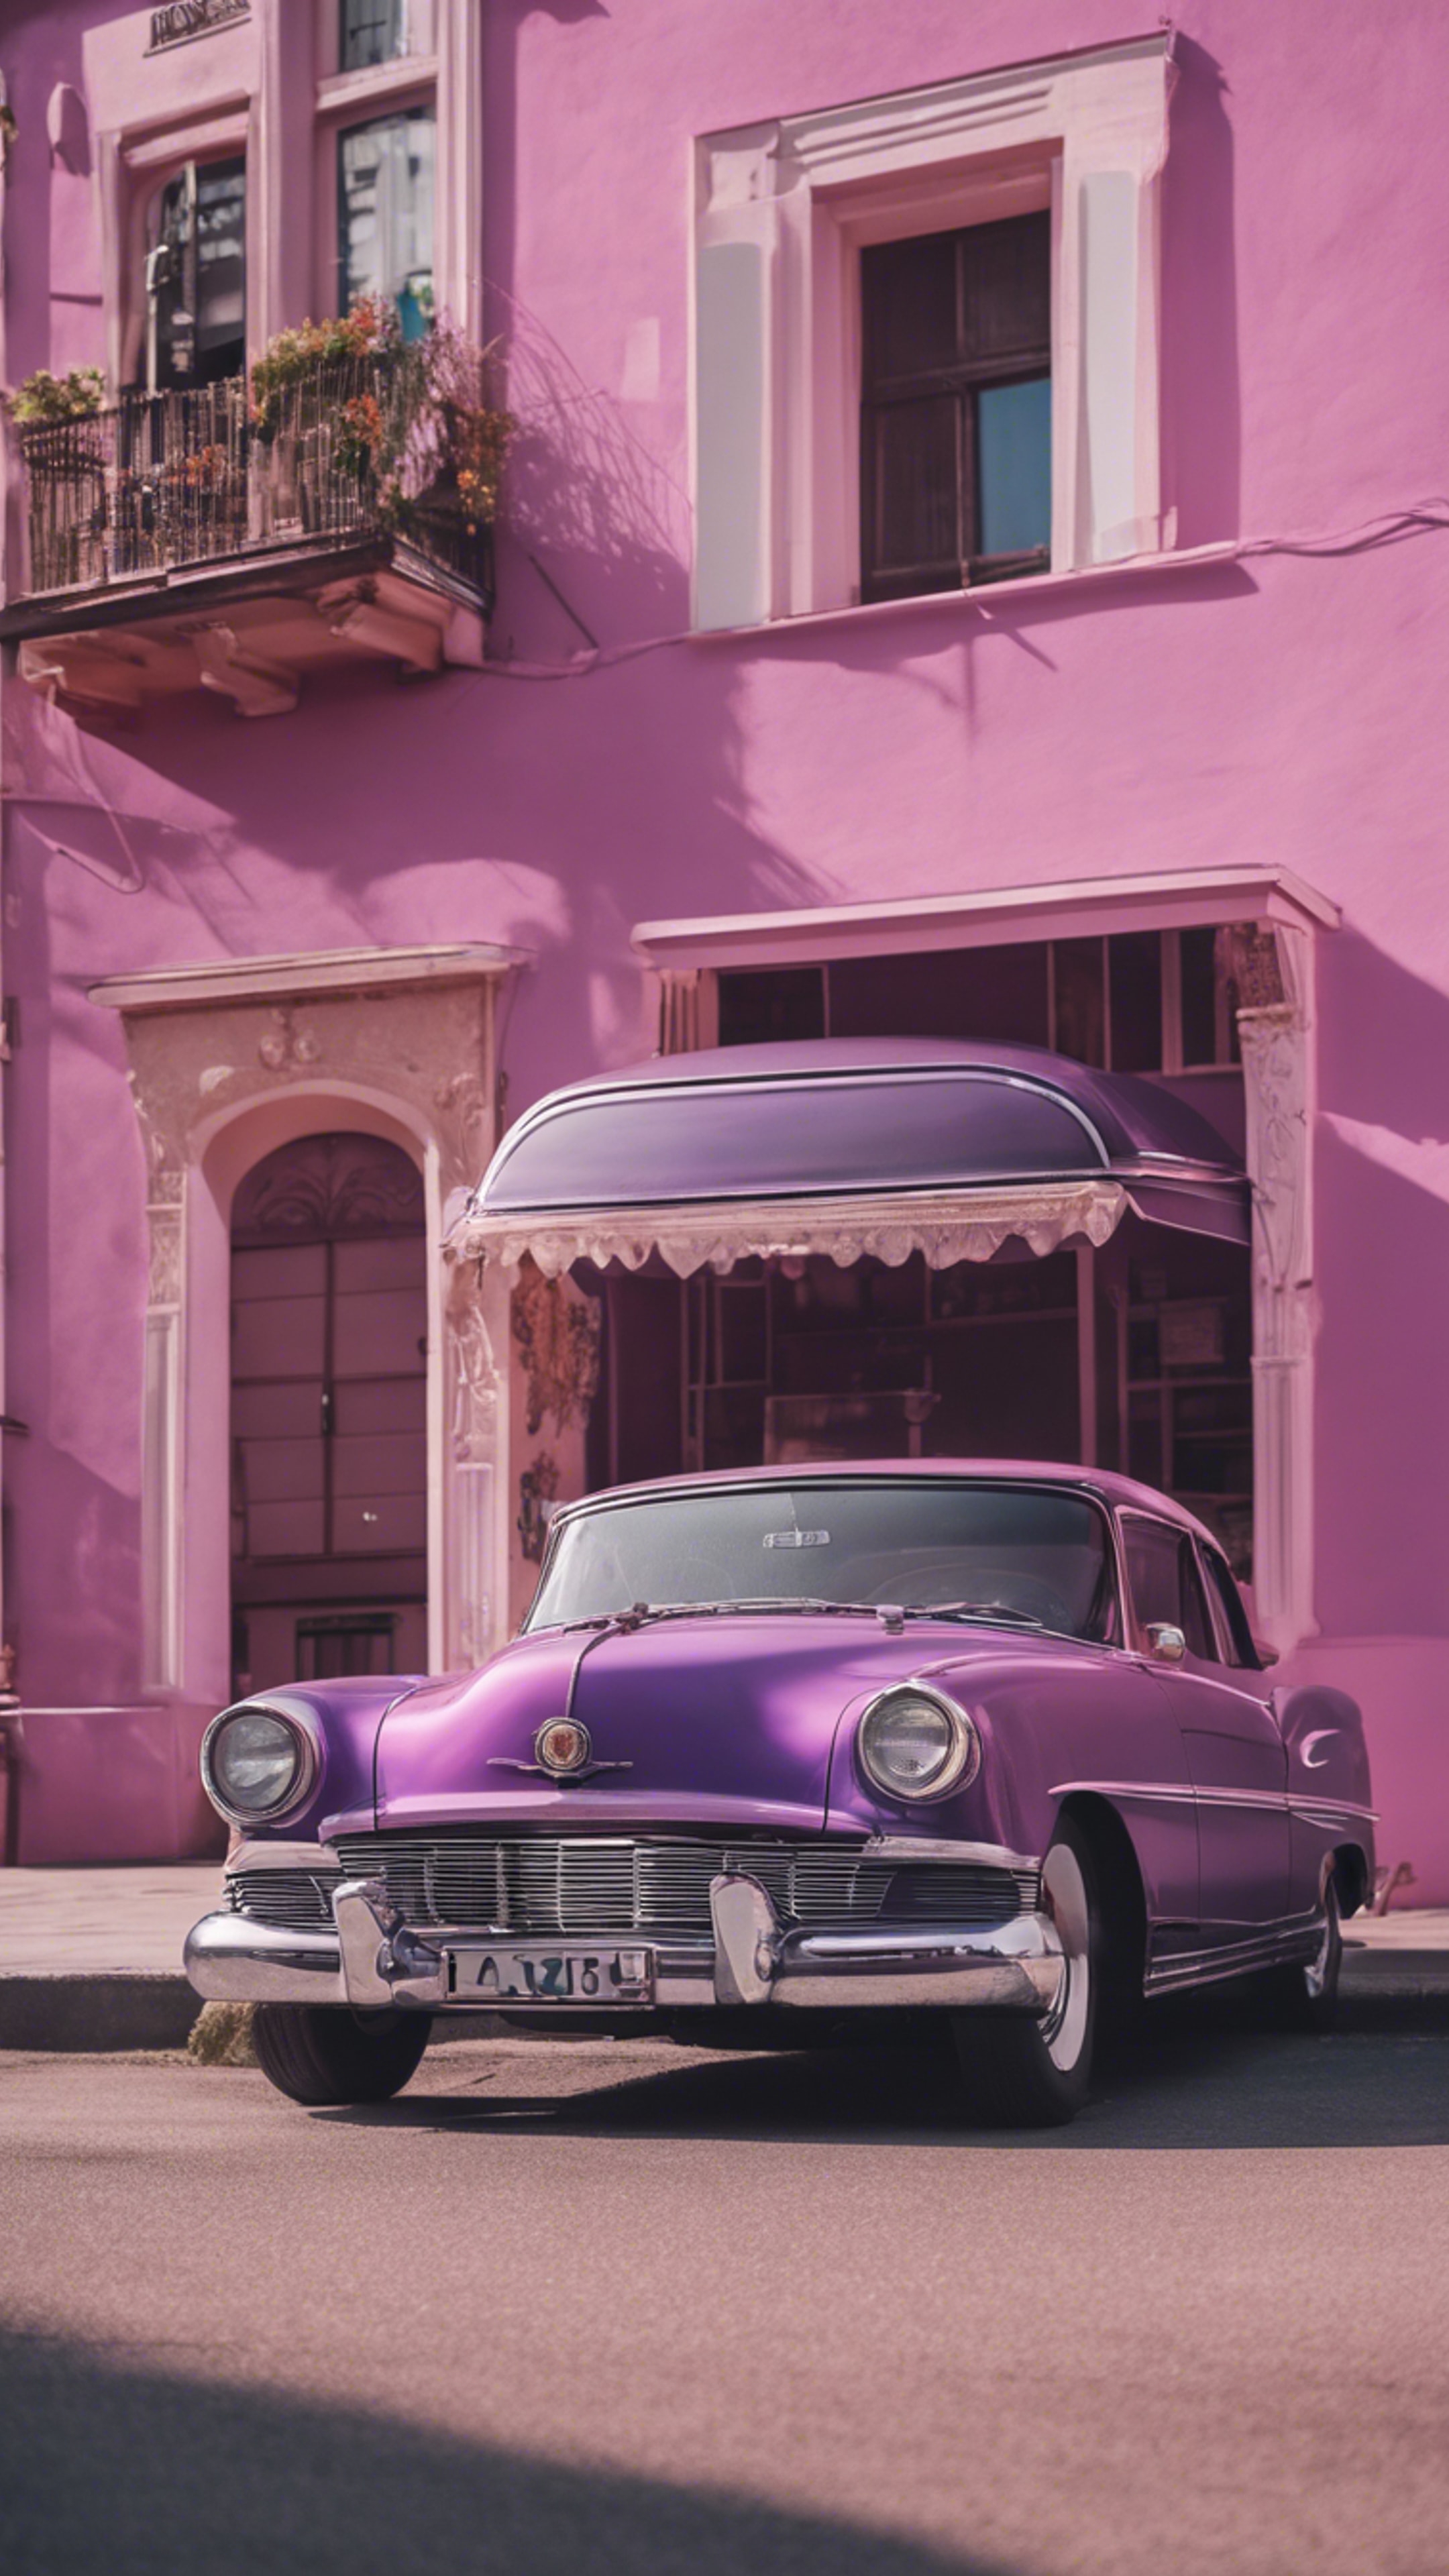 A purple vintage car parked by a pink pastel building. Wallpaper[f1101ed4526e489a8b1f]